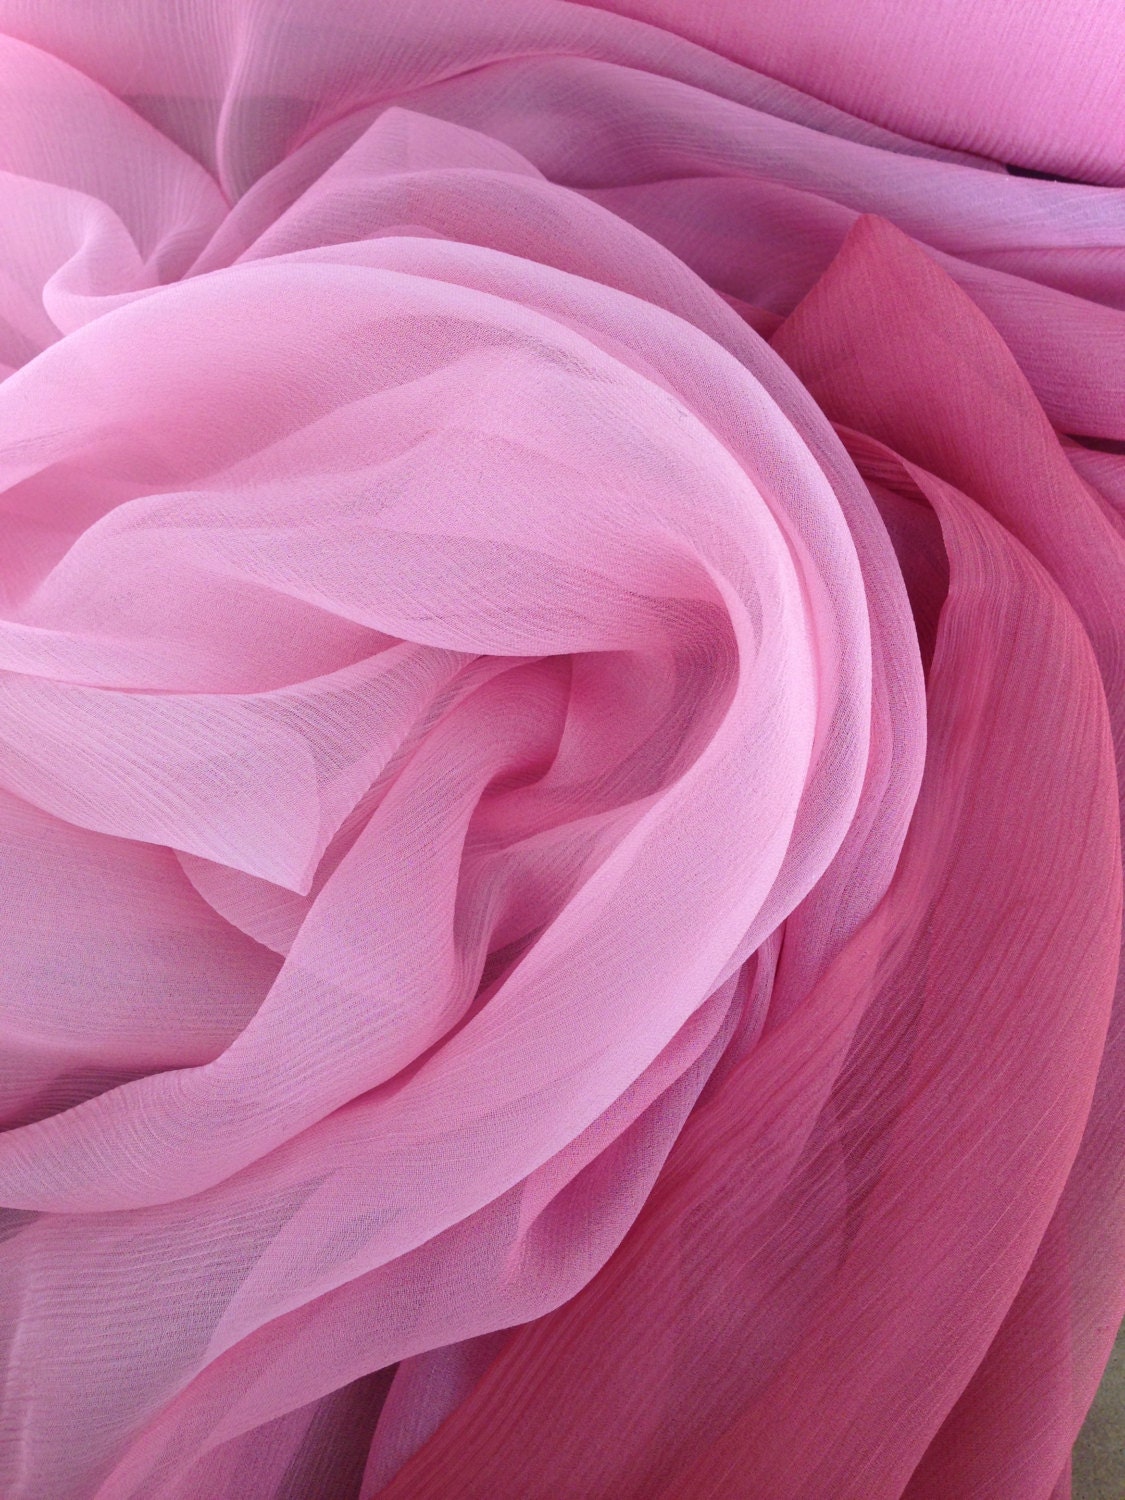 RESERVED NOT PUBLIC Crinkle Chiffon Silk Pink Ombré Fabric